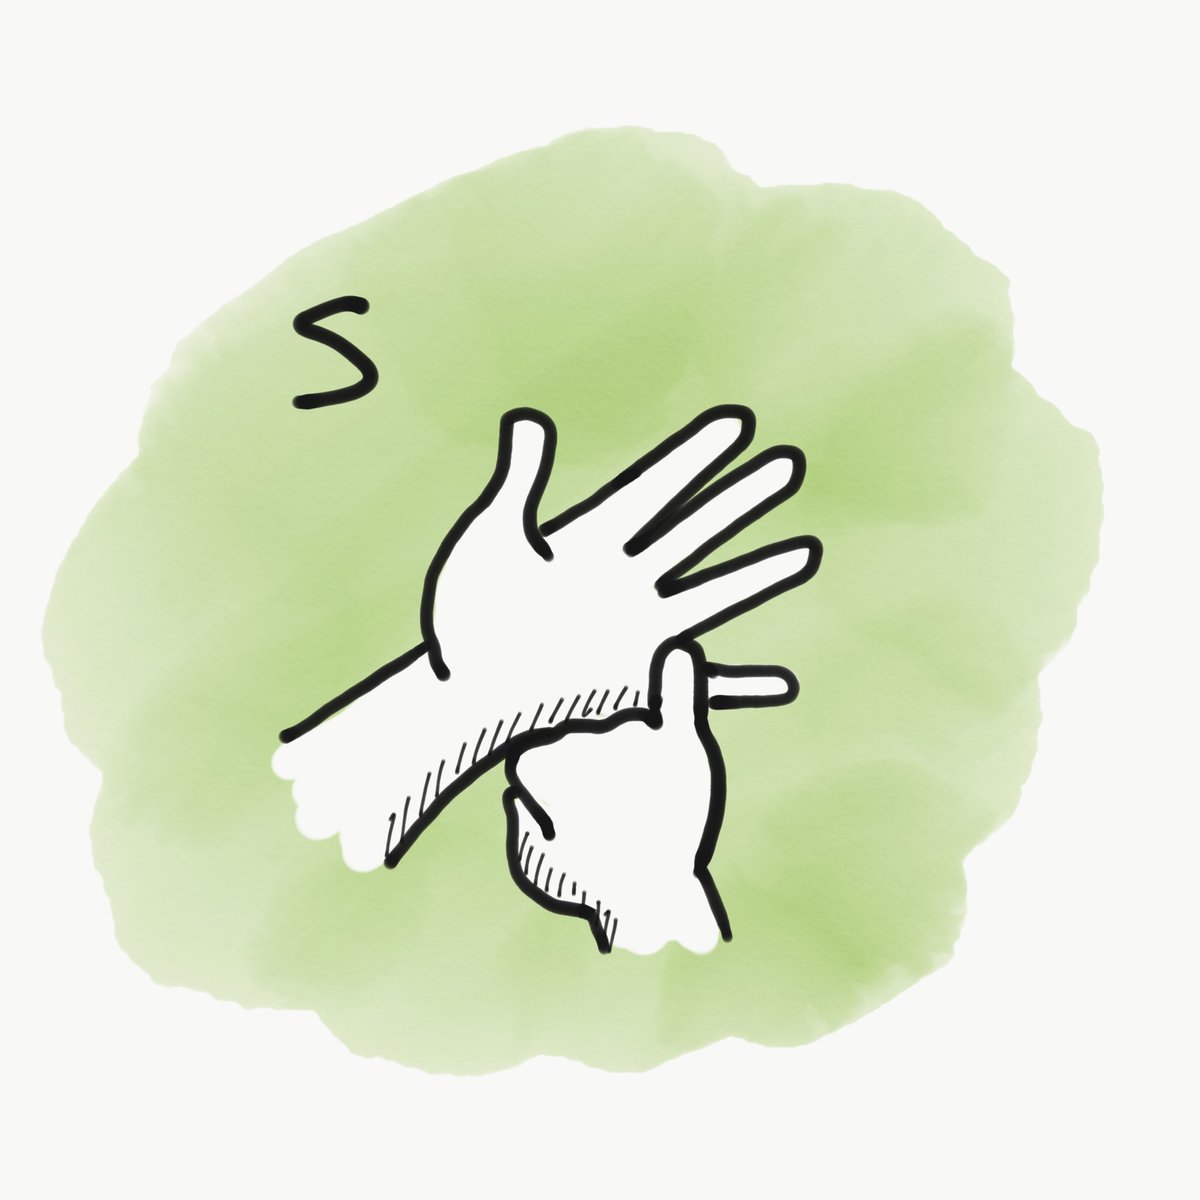 It was  #DeafAwarenessWeek this past week, and I took the opportunity to relearn the BSL finger-spelling alphabet. I drew all of the letters out to help remember them... 